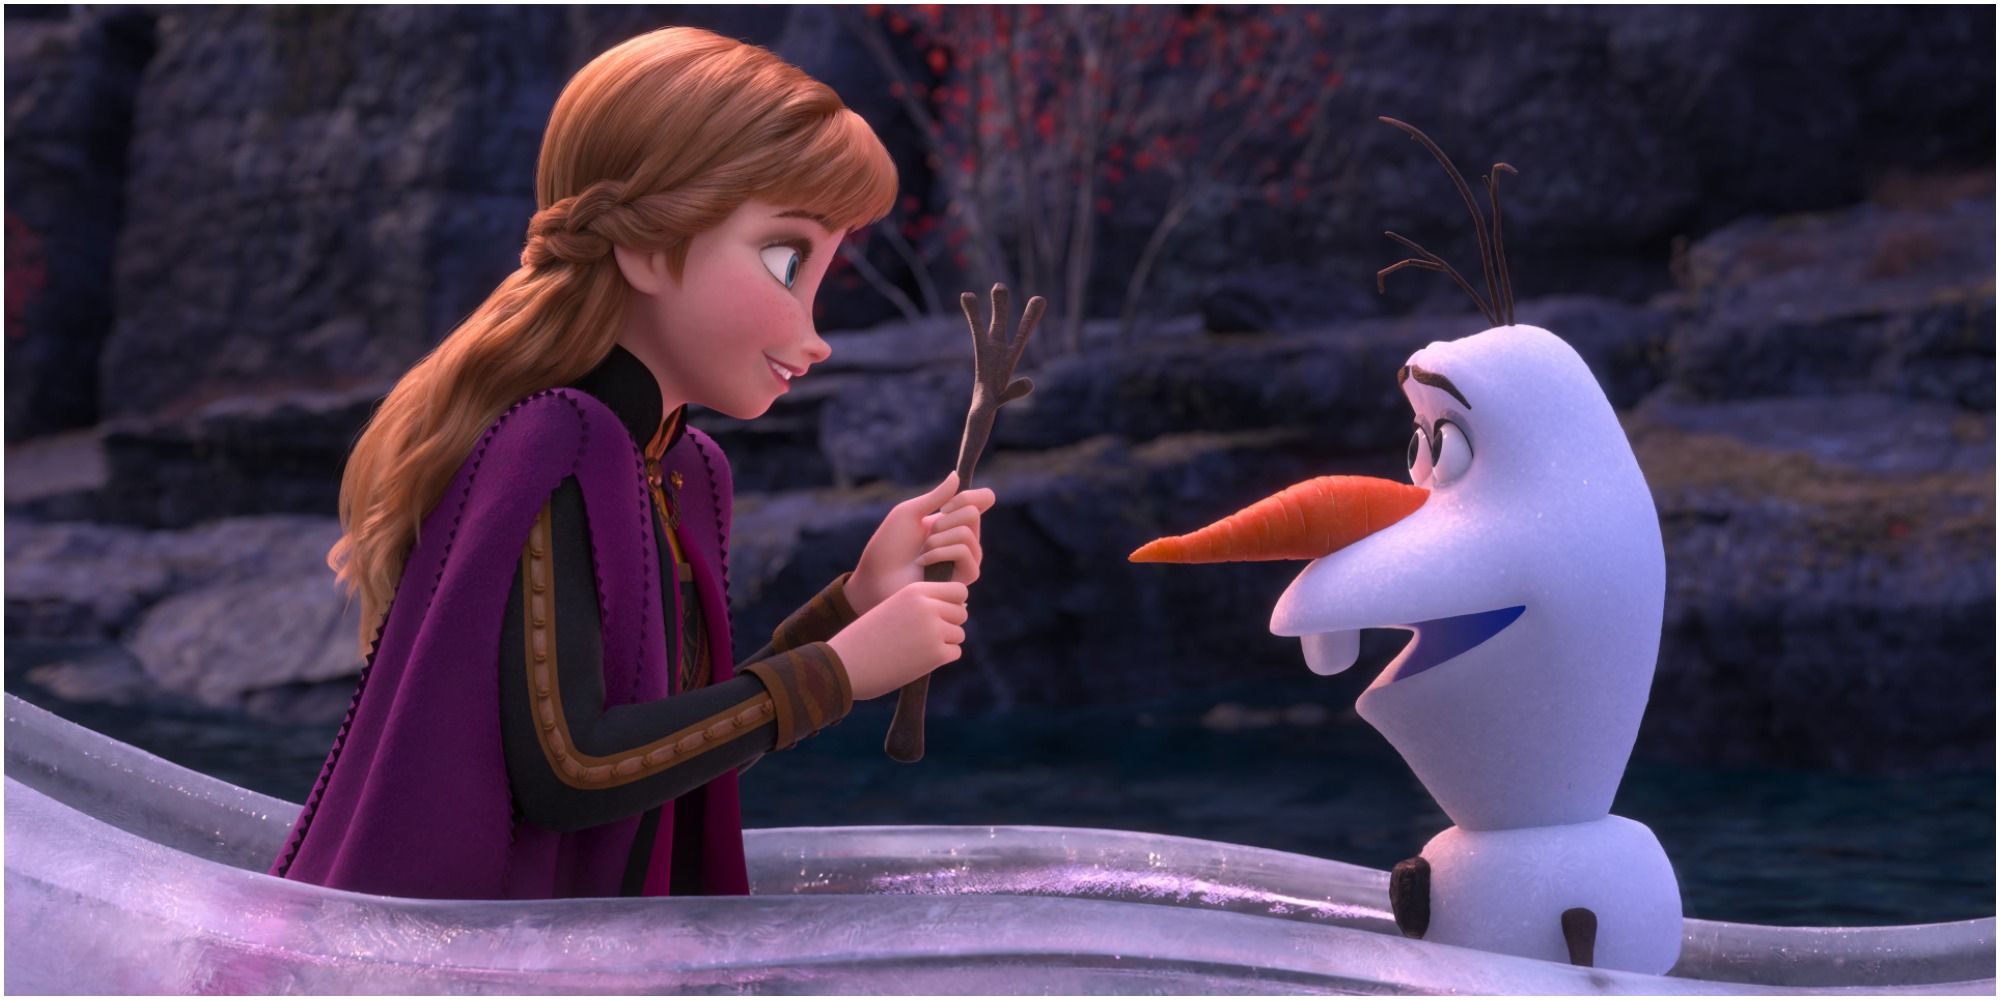 Anna and Olaf riding together in an ice boat from Frozen 2